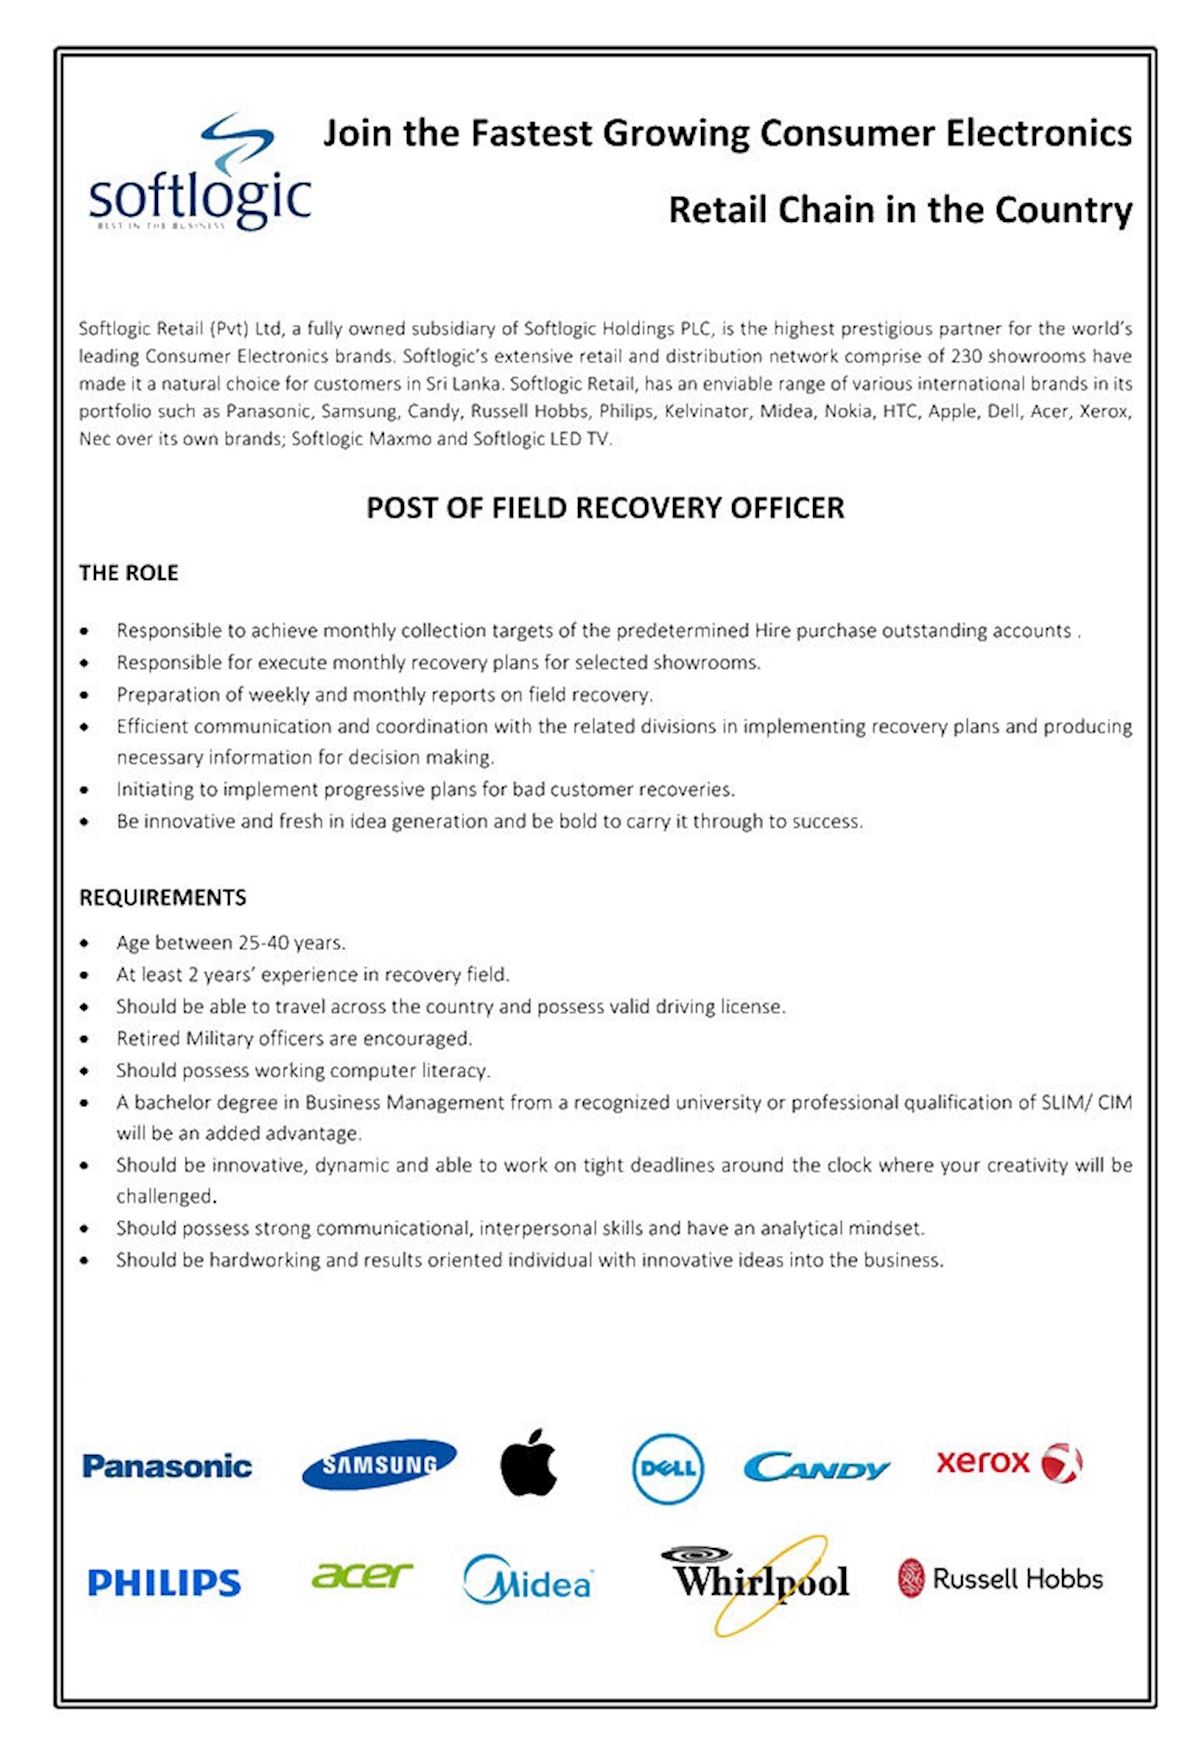 Post of Field Recovery Officer 